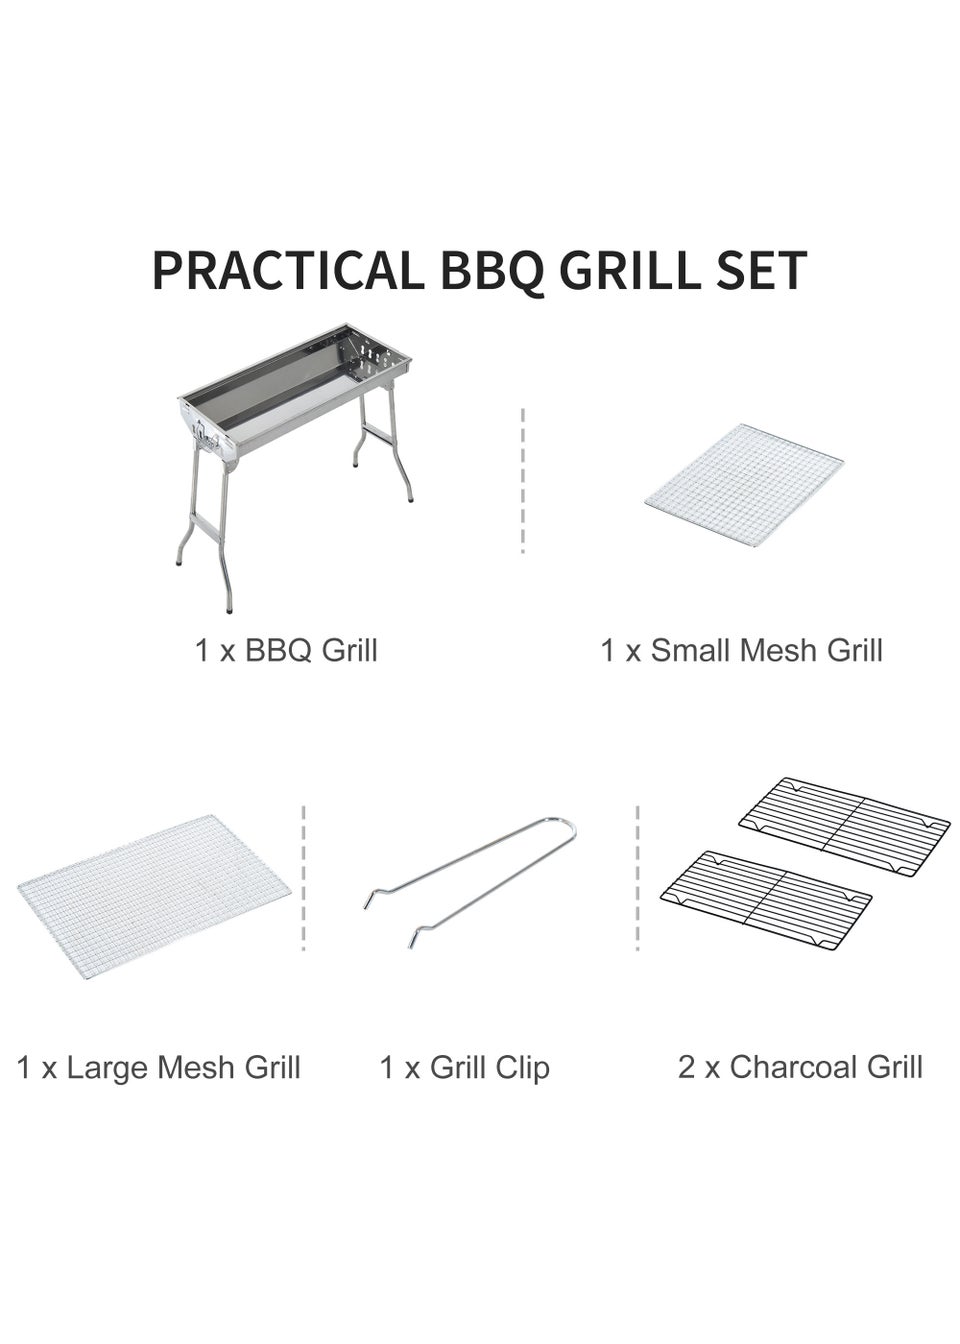 Outsunny Portable Stainless Steel Charcoal Barbecue (73cm x 33cm x 71cm)